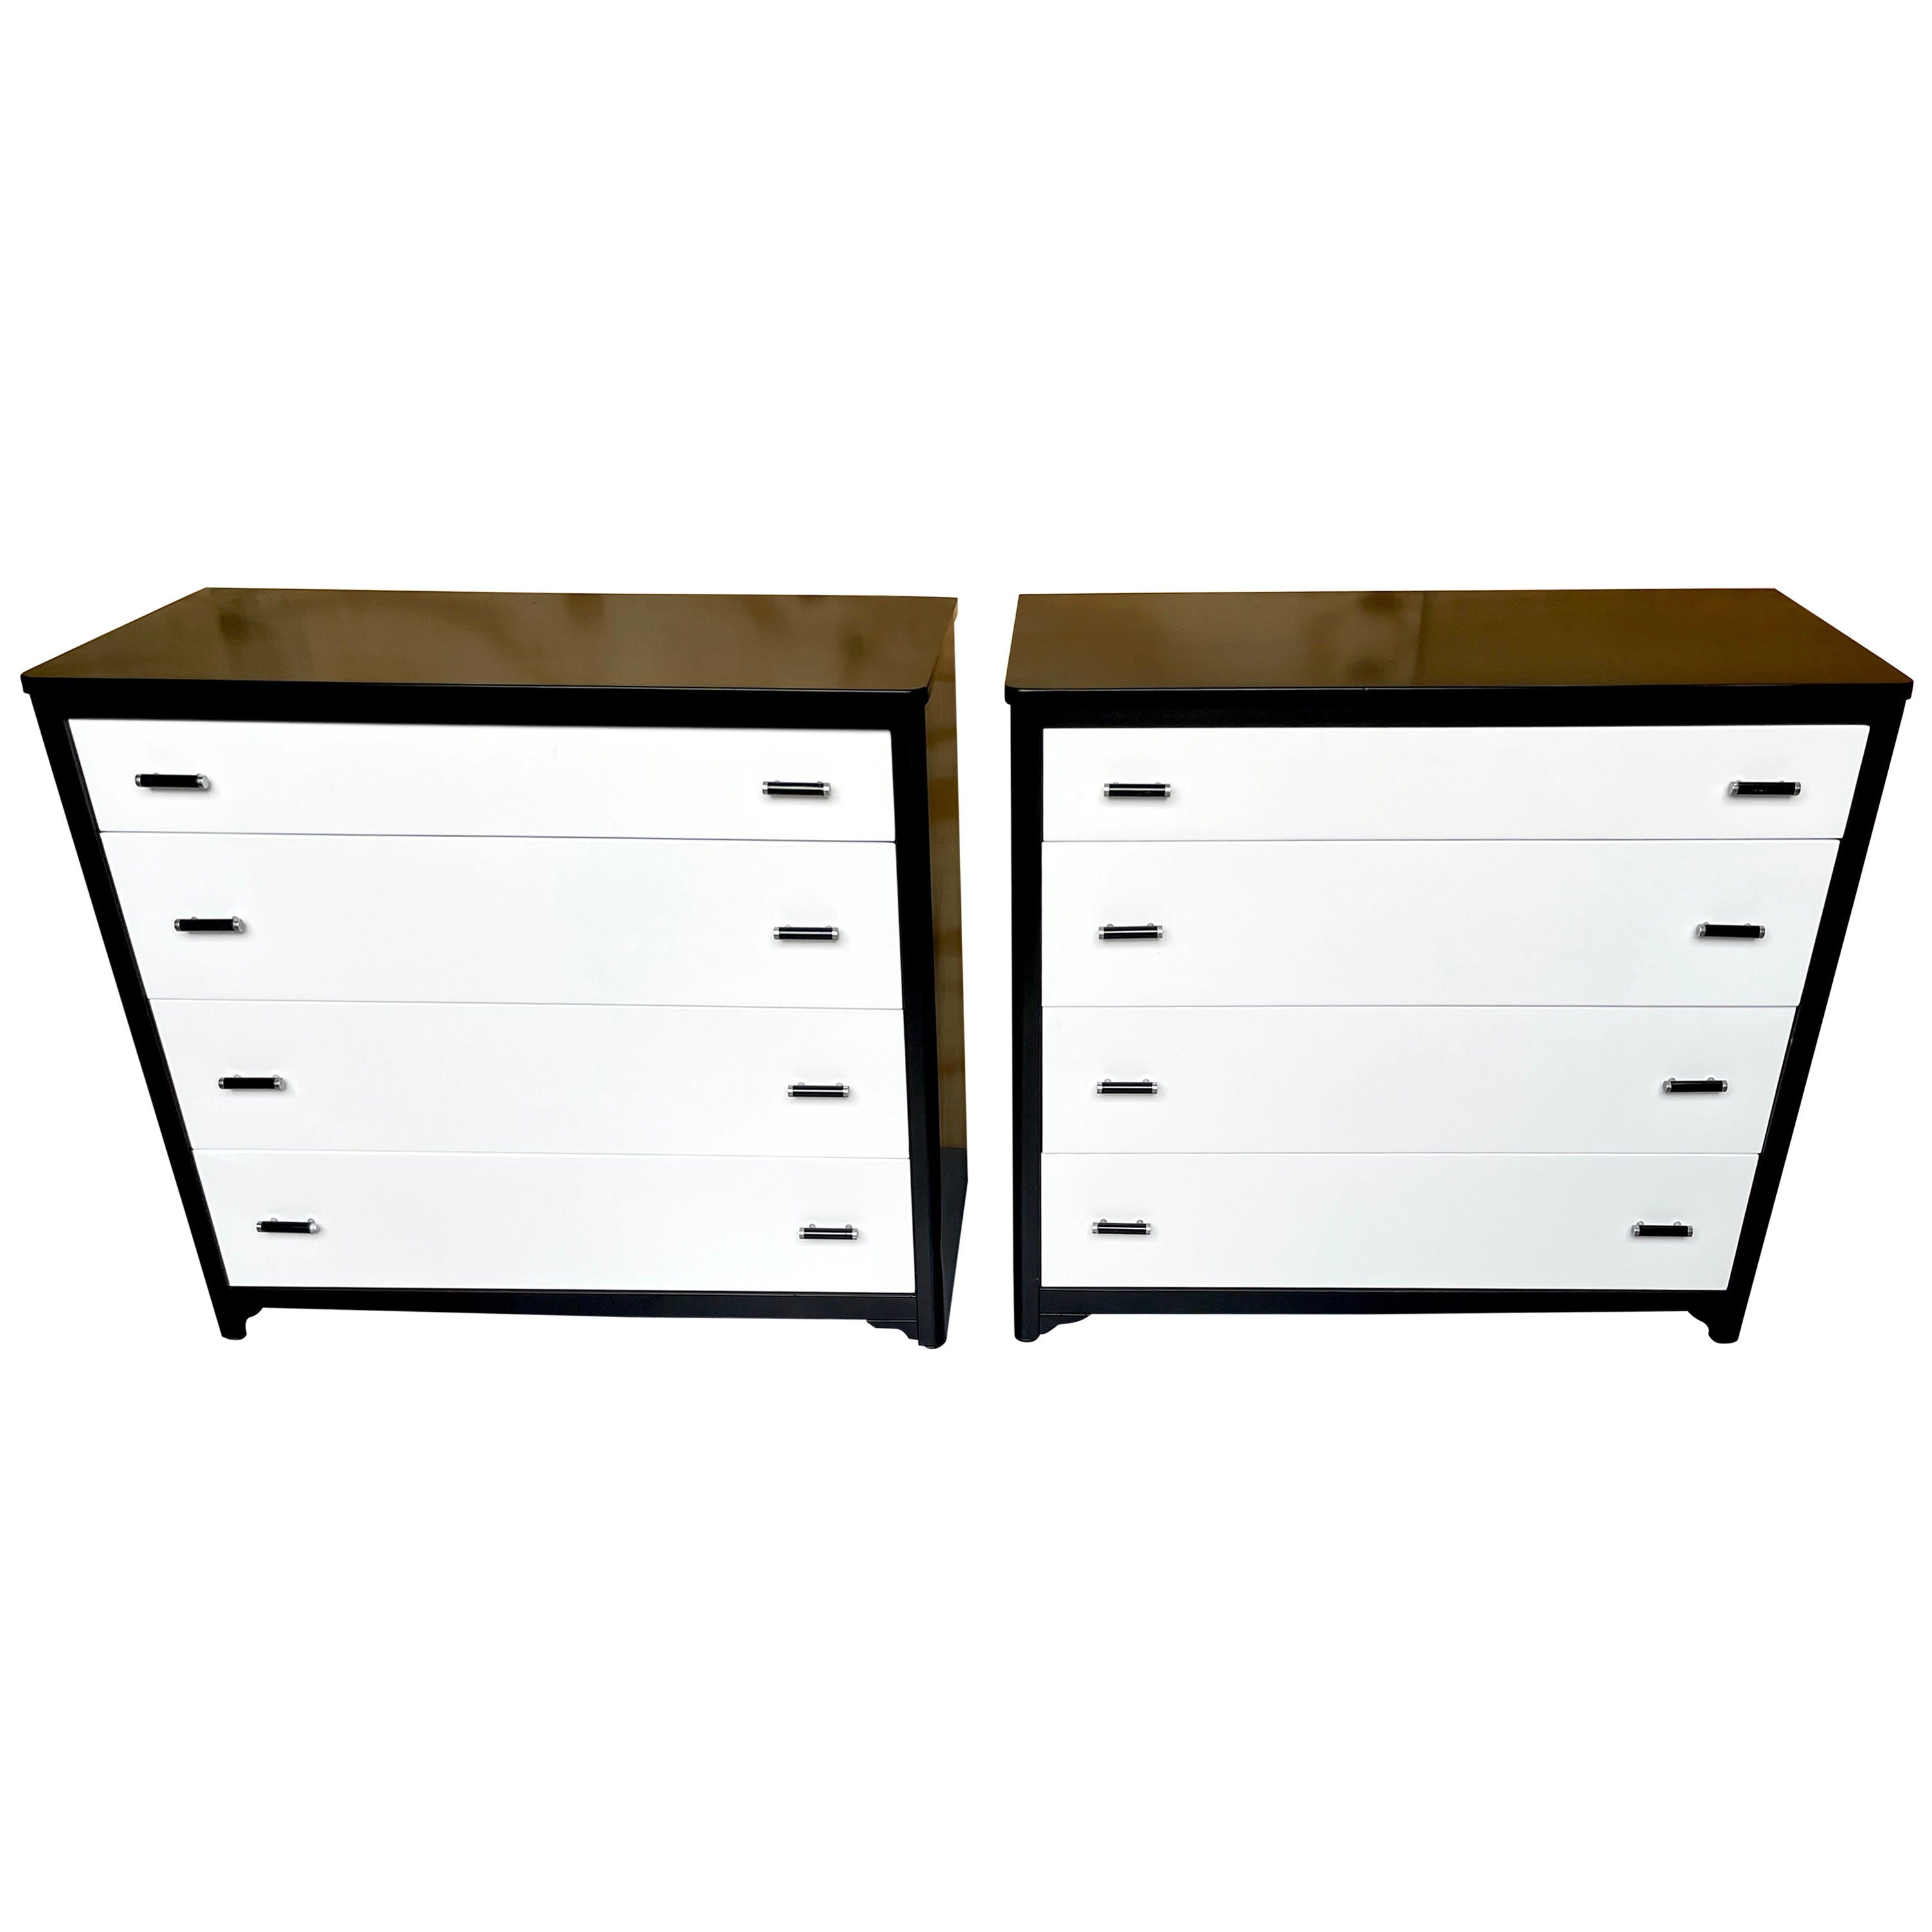 Pair Moderne Black & White Lacquered Steel Chests by Norman Bel Geddes, Restored